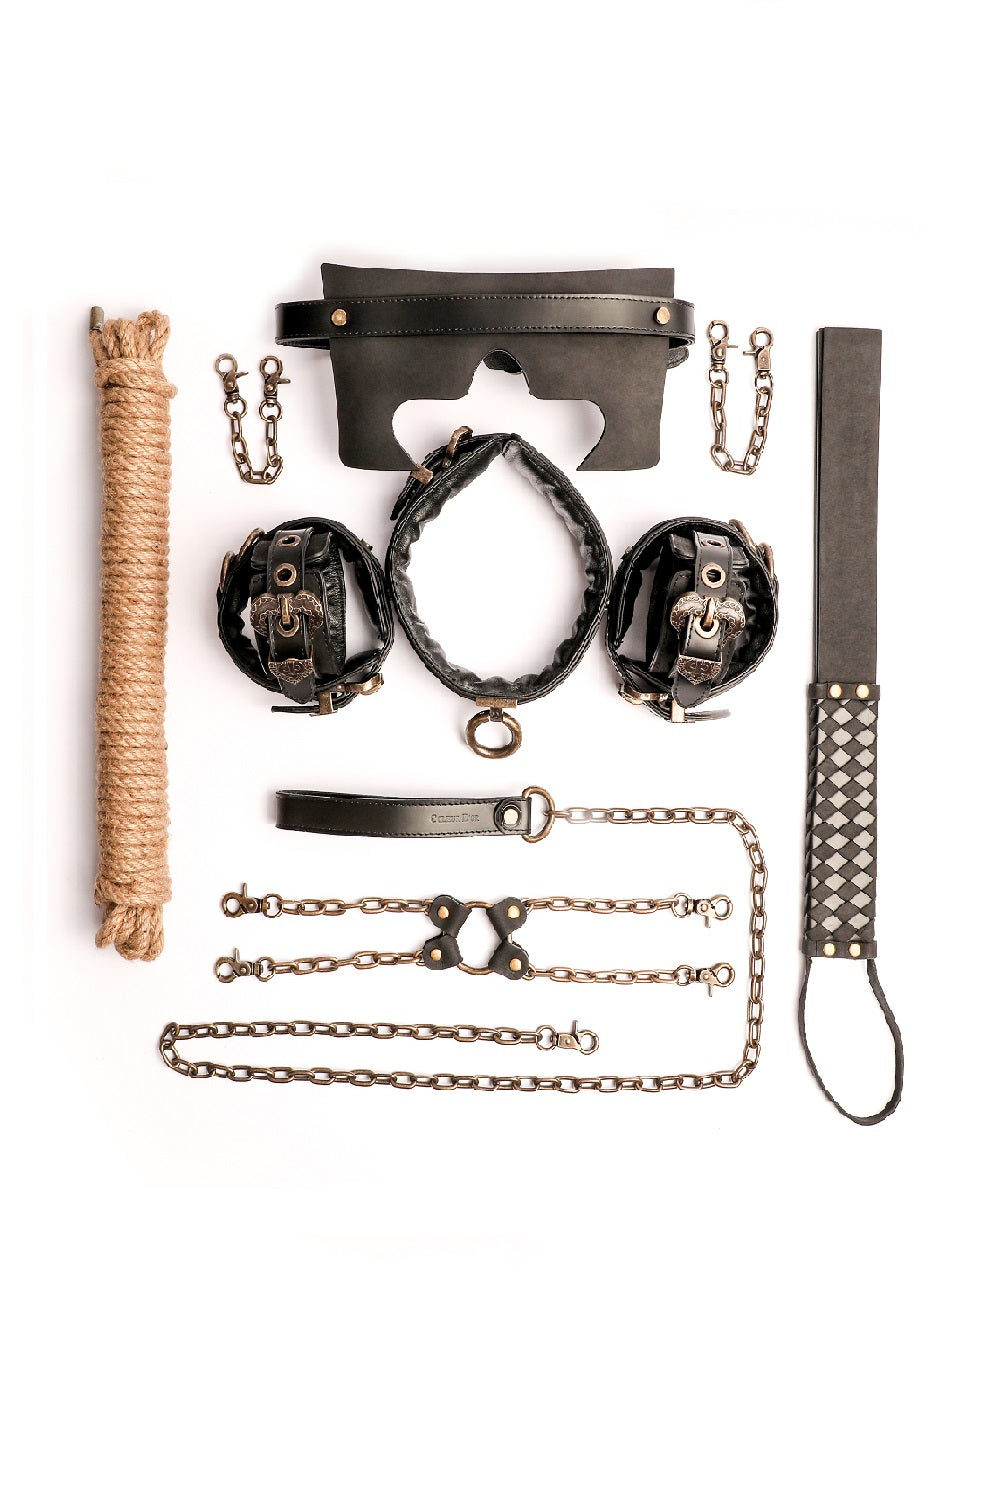 BDSM Set Real Leather Cuffs  Blindfold Slapper Collar and Leash